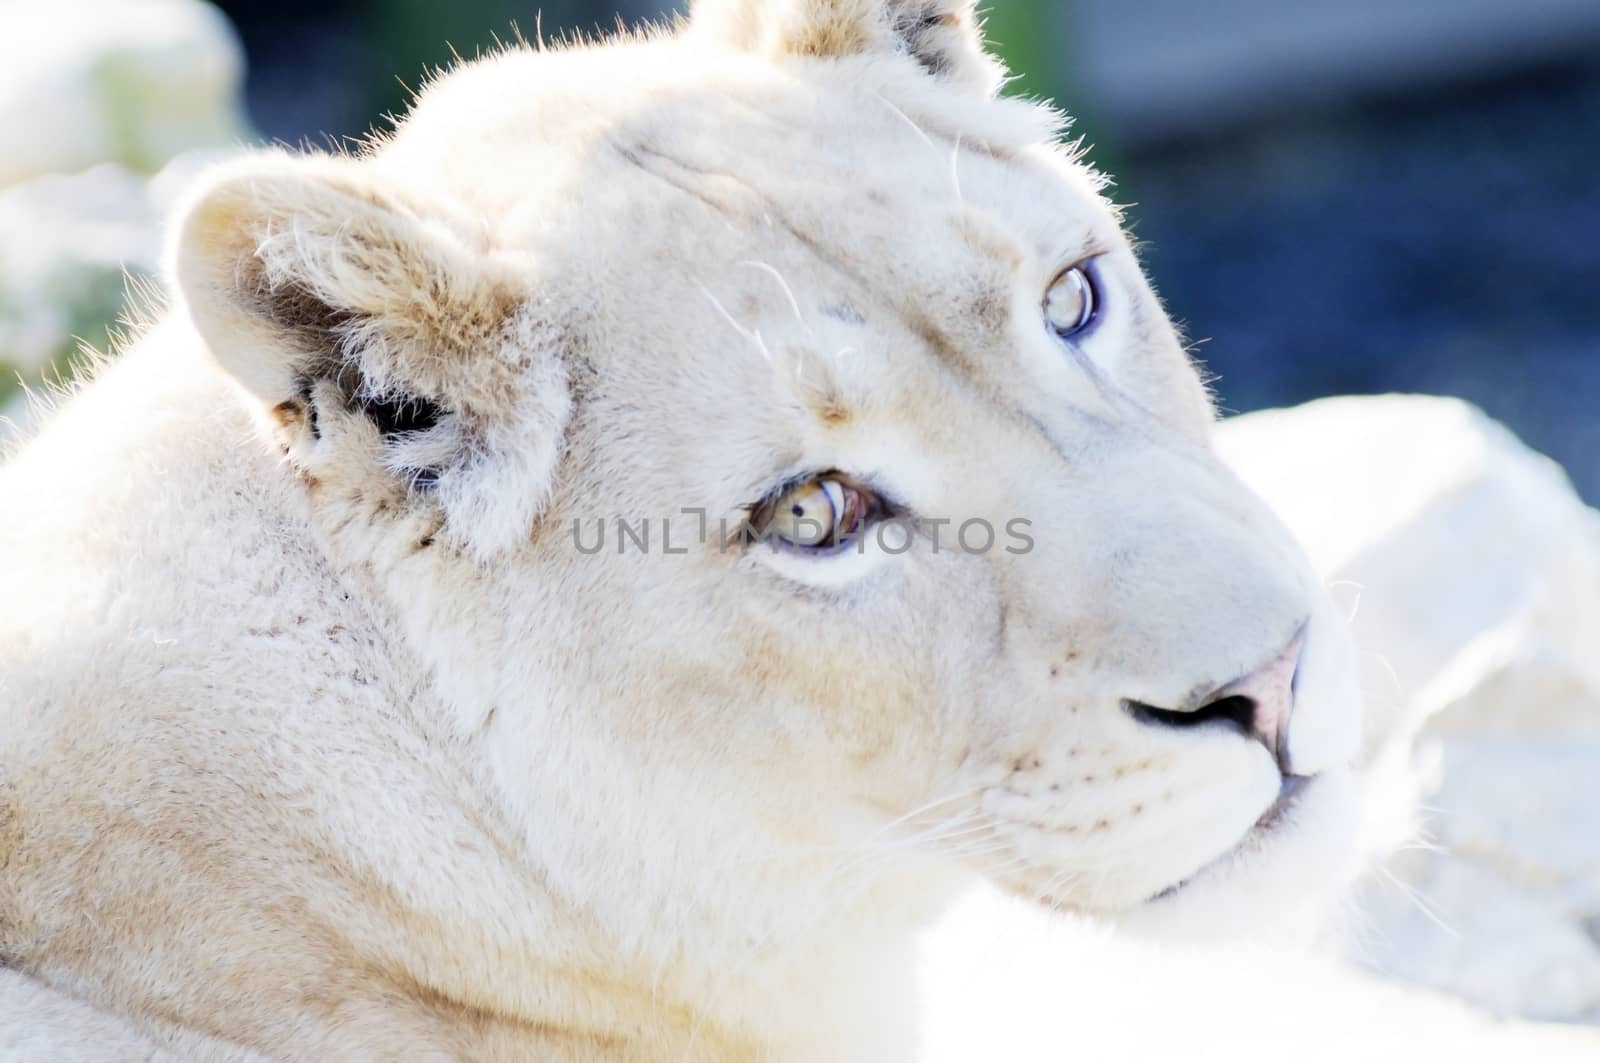 Rare white lion female closeup showing face and fur detail